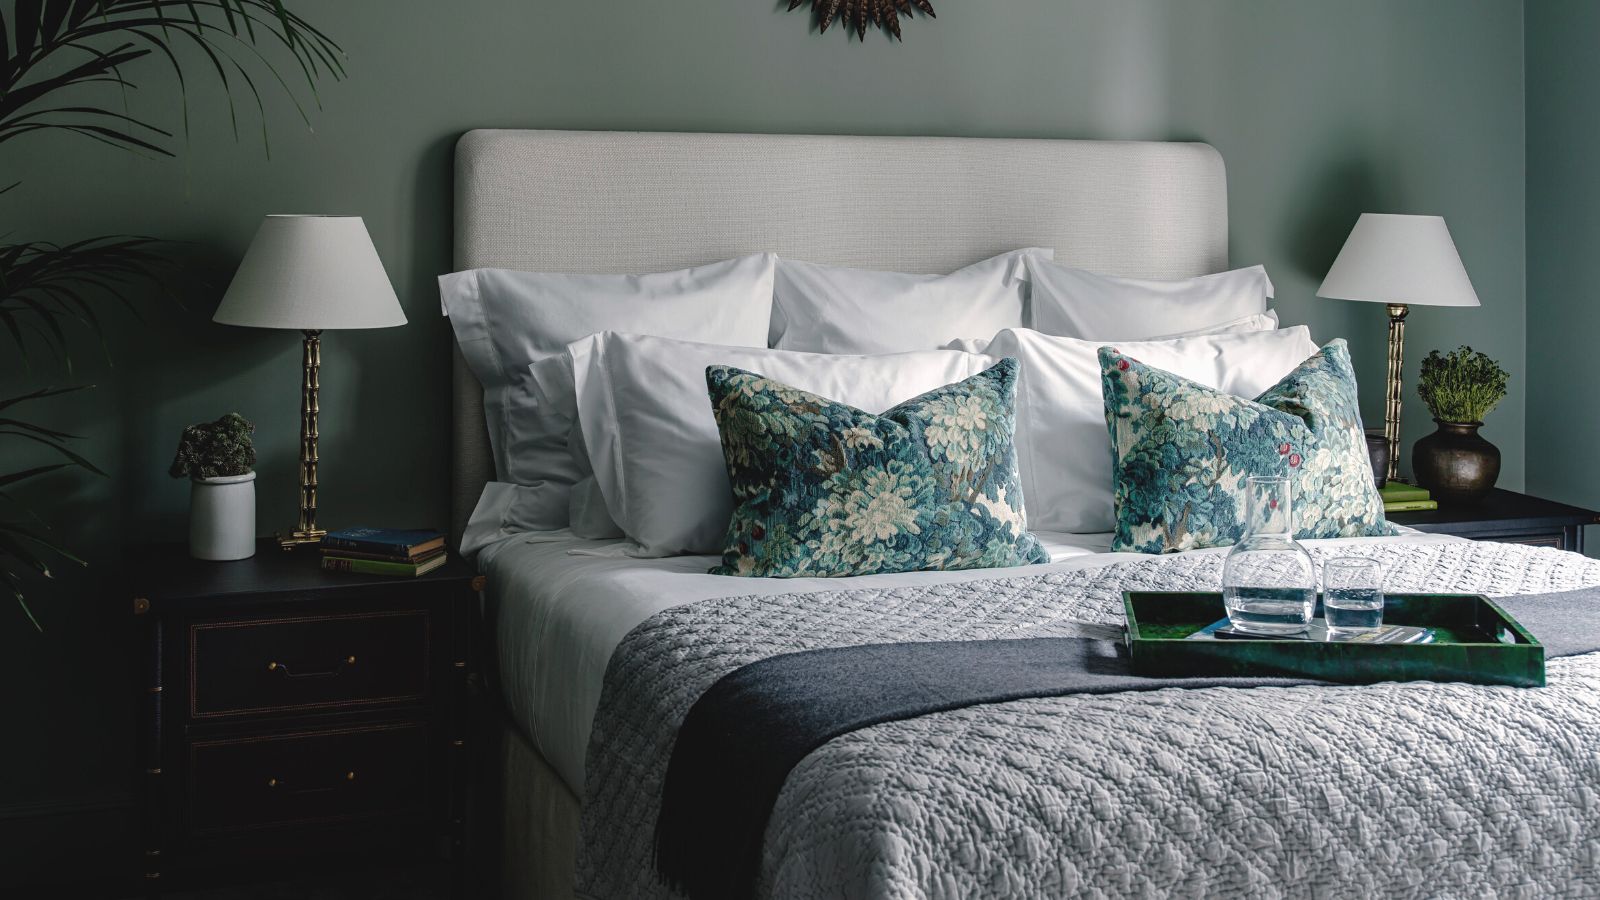 Where to store throw pillows at night: expert solutions